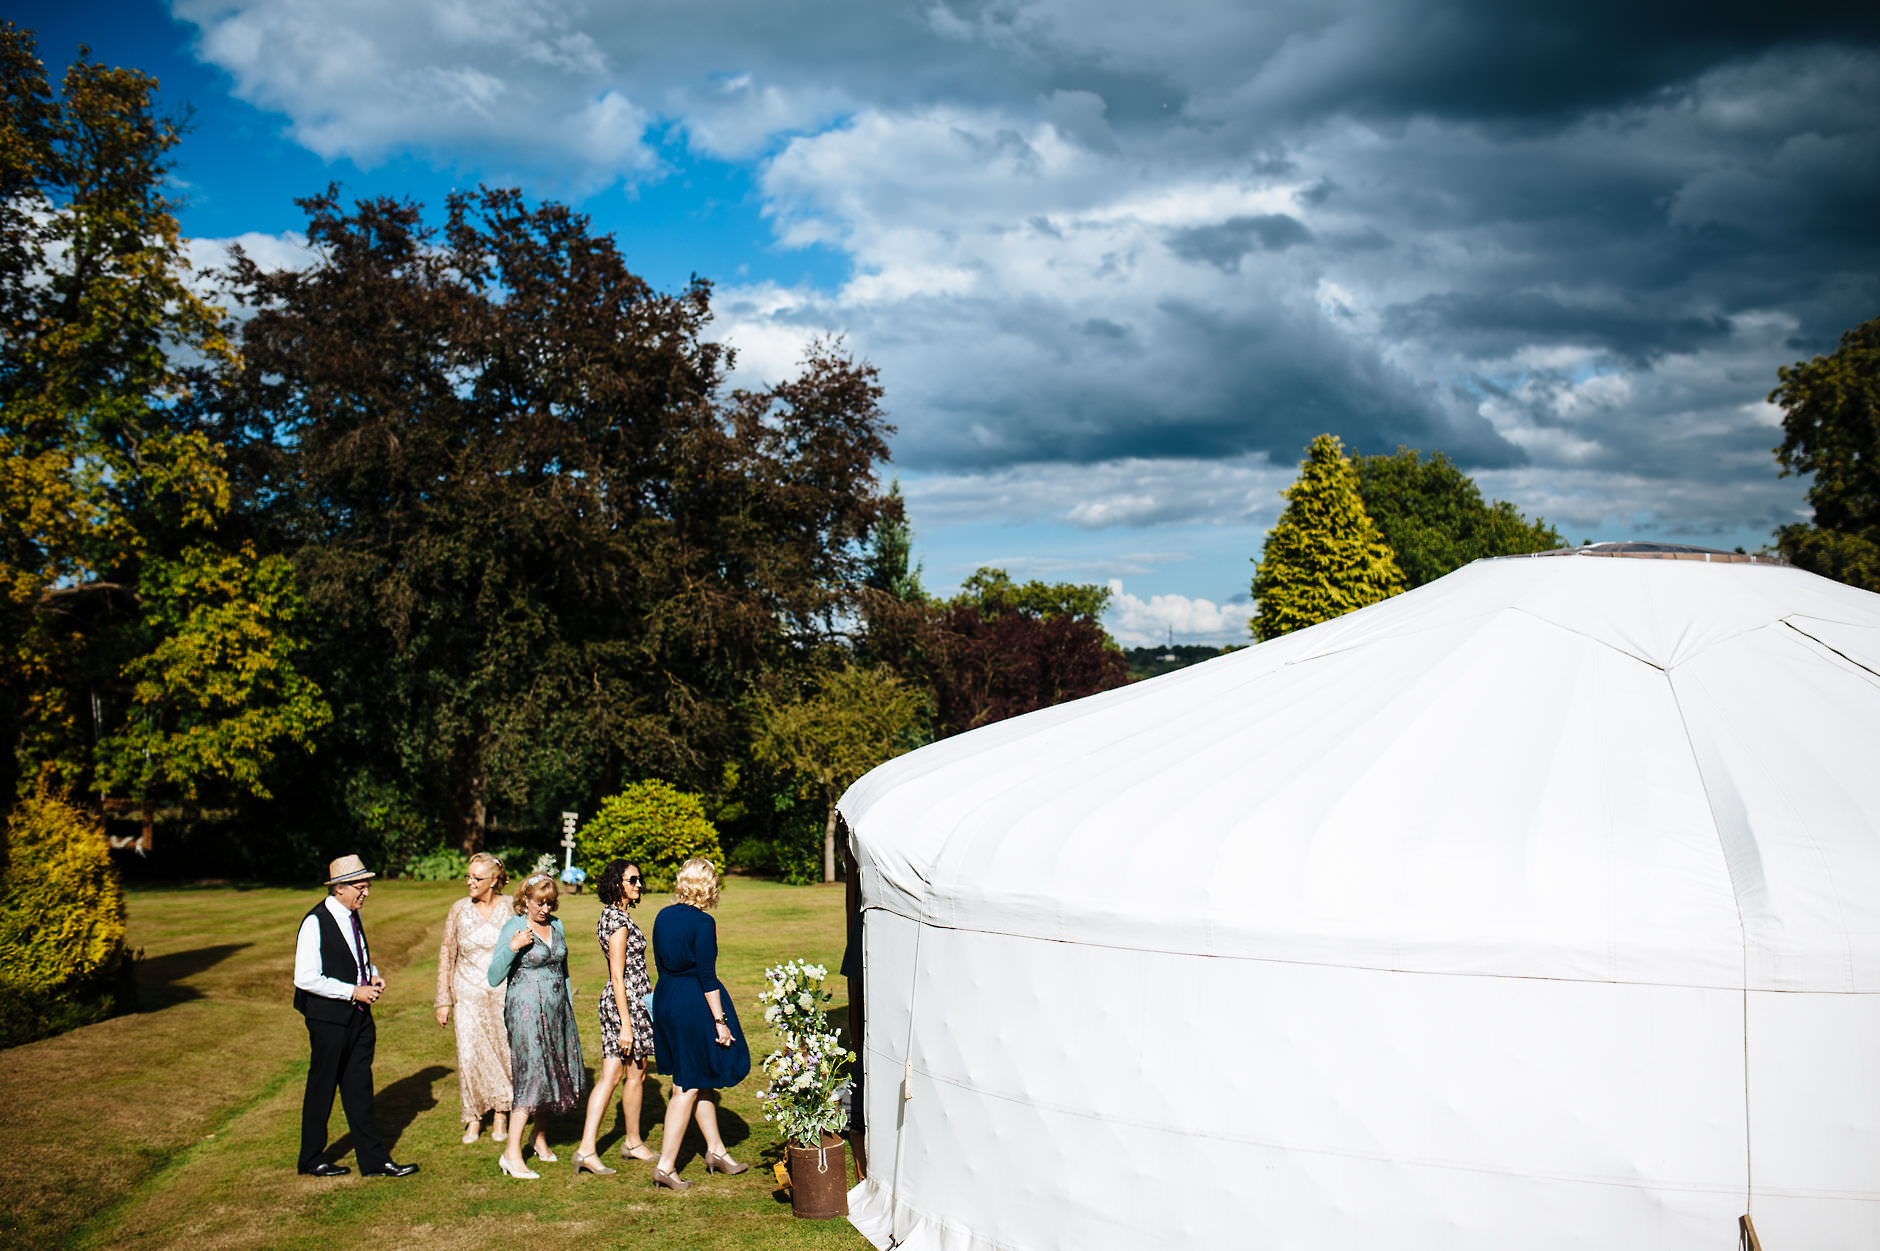 guests entering the yurt